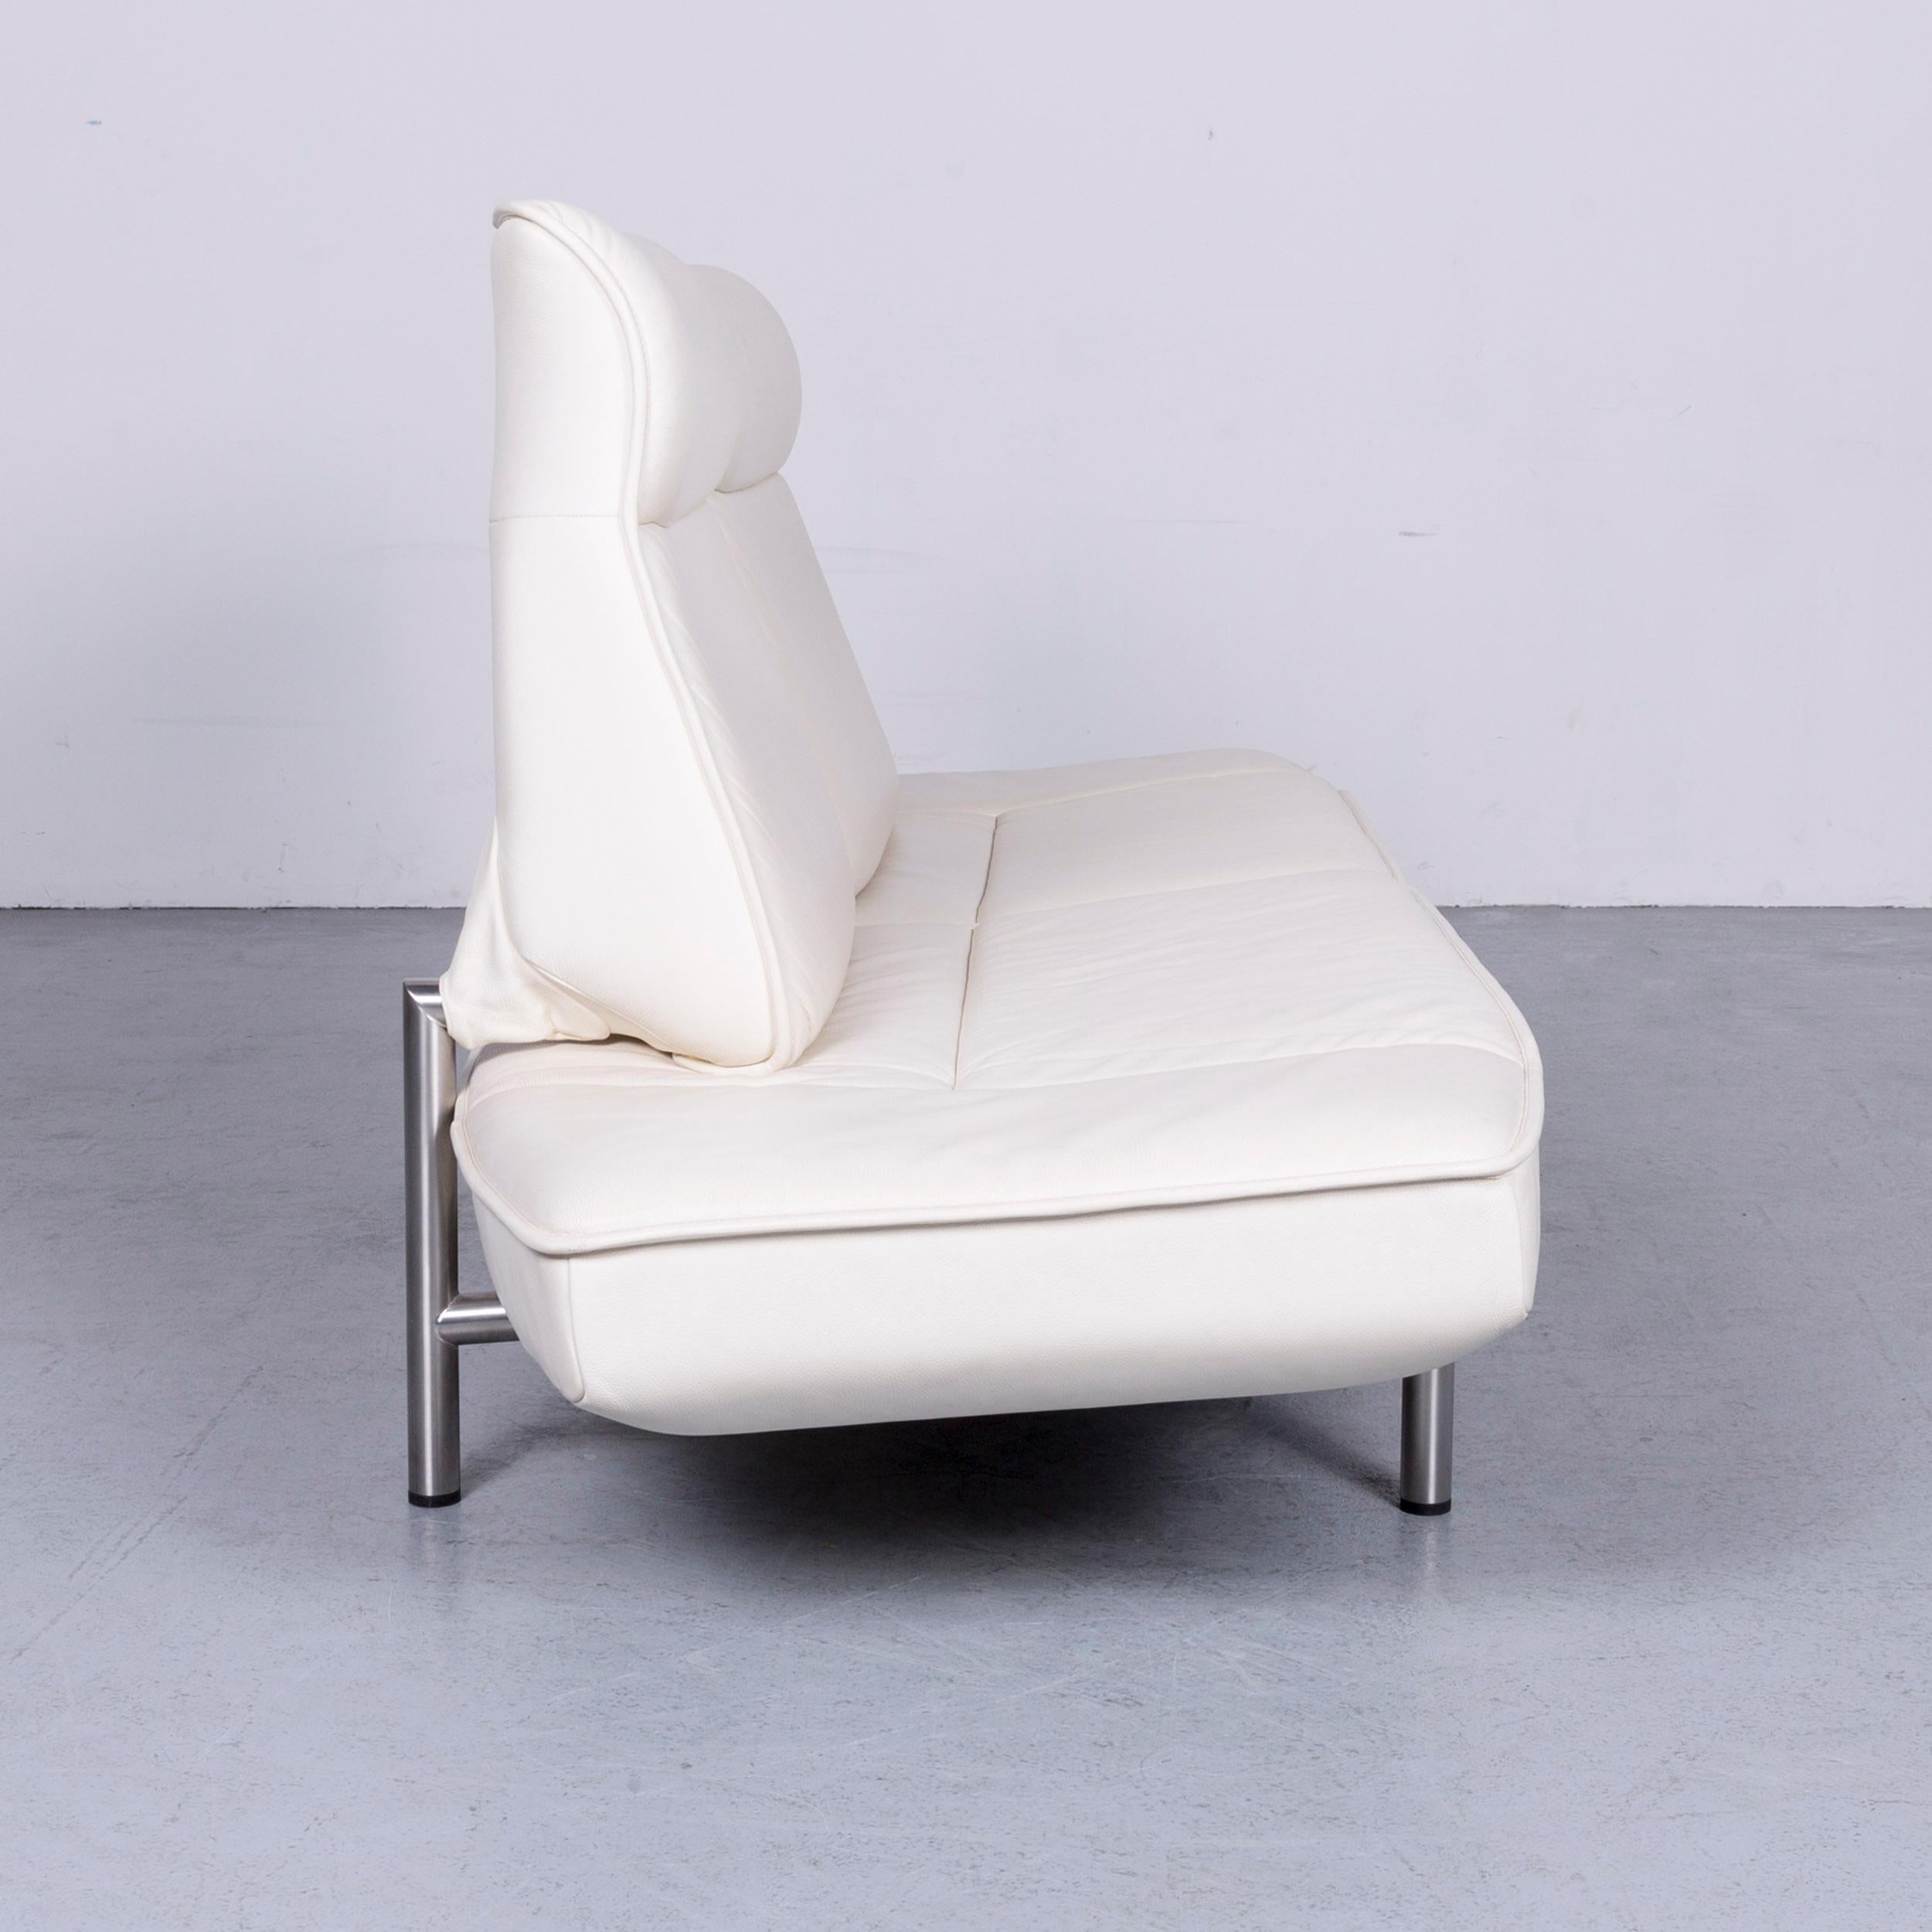 De Sede DS 450 Designer Leather Sofa White Two-Seat Function Modern 8